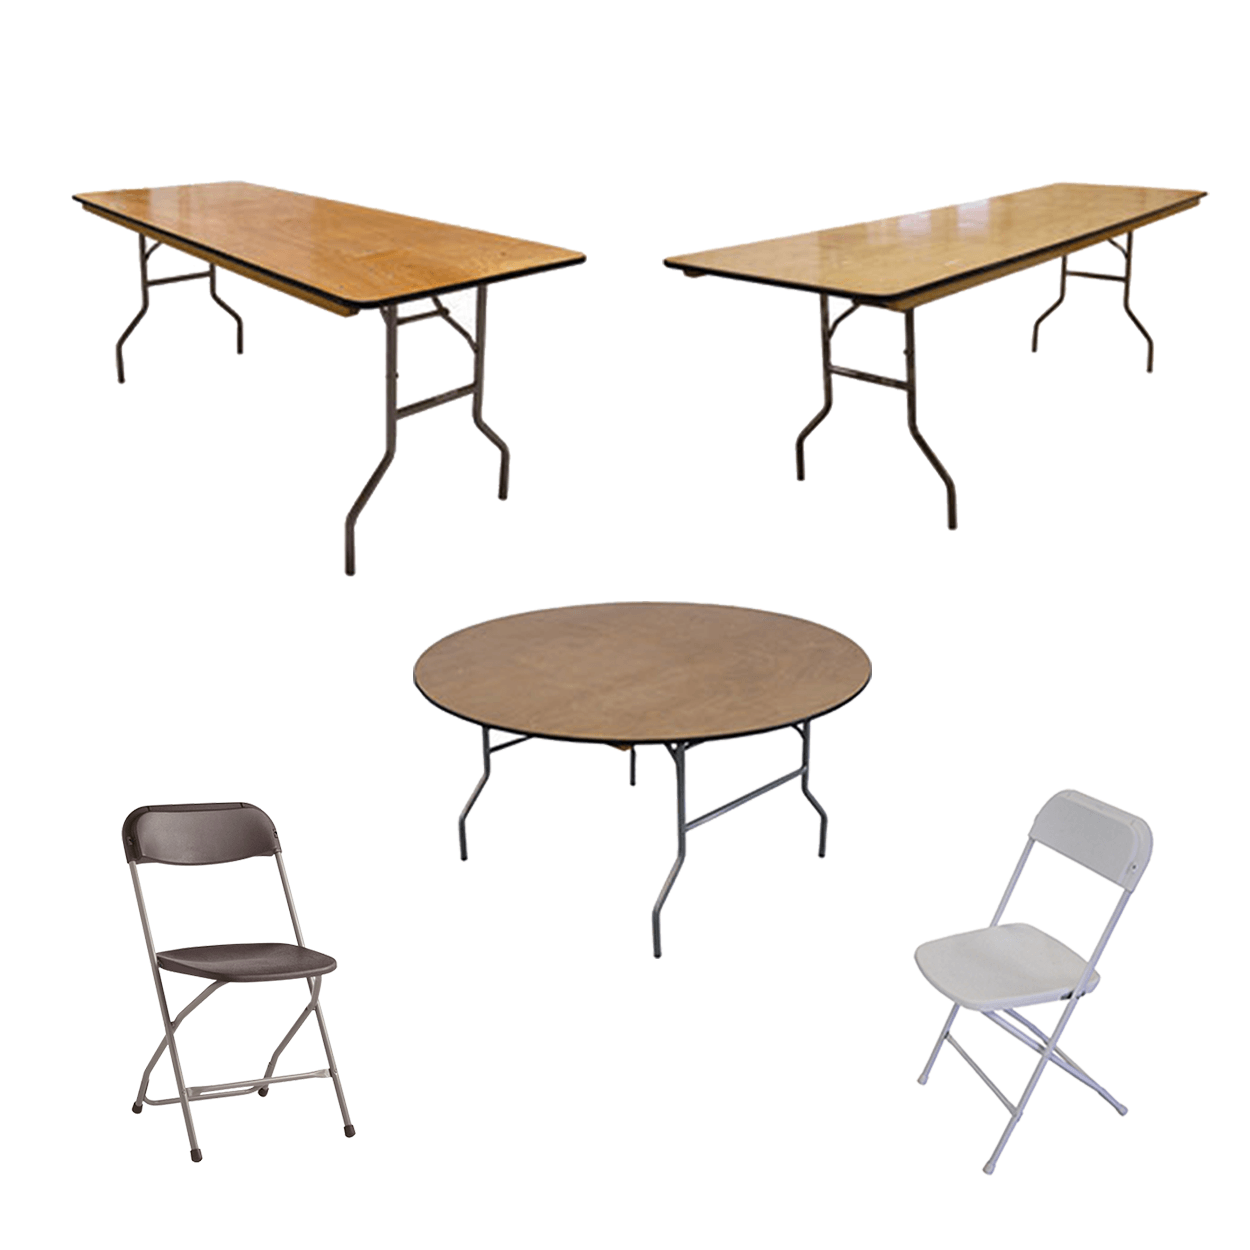 Table & Chair Rentals from Easy Rent All